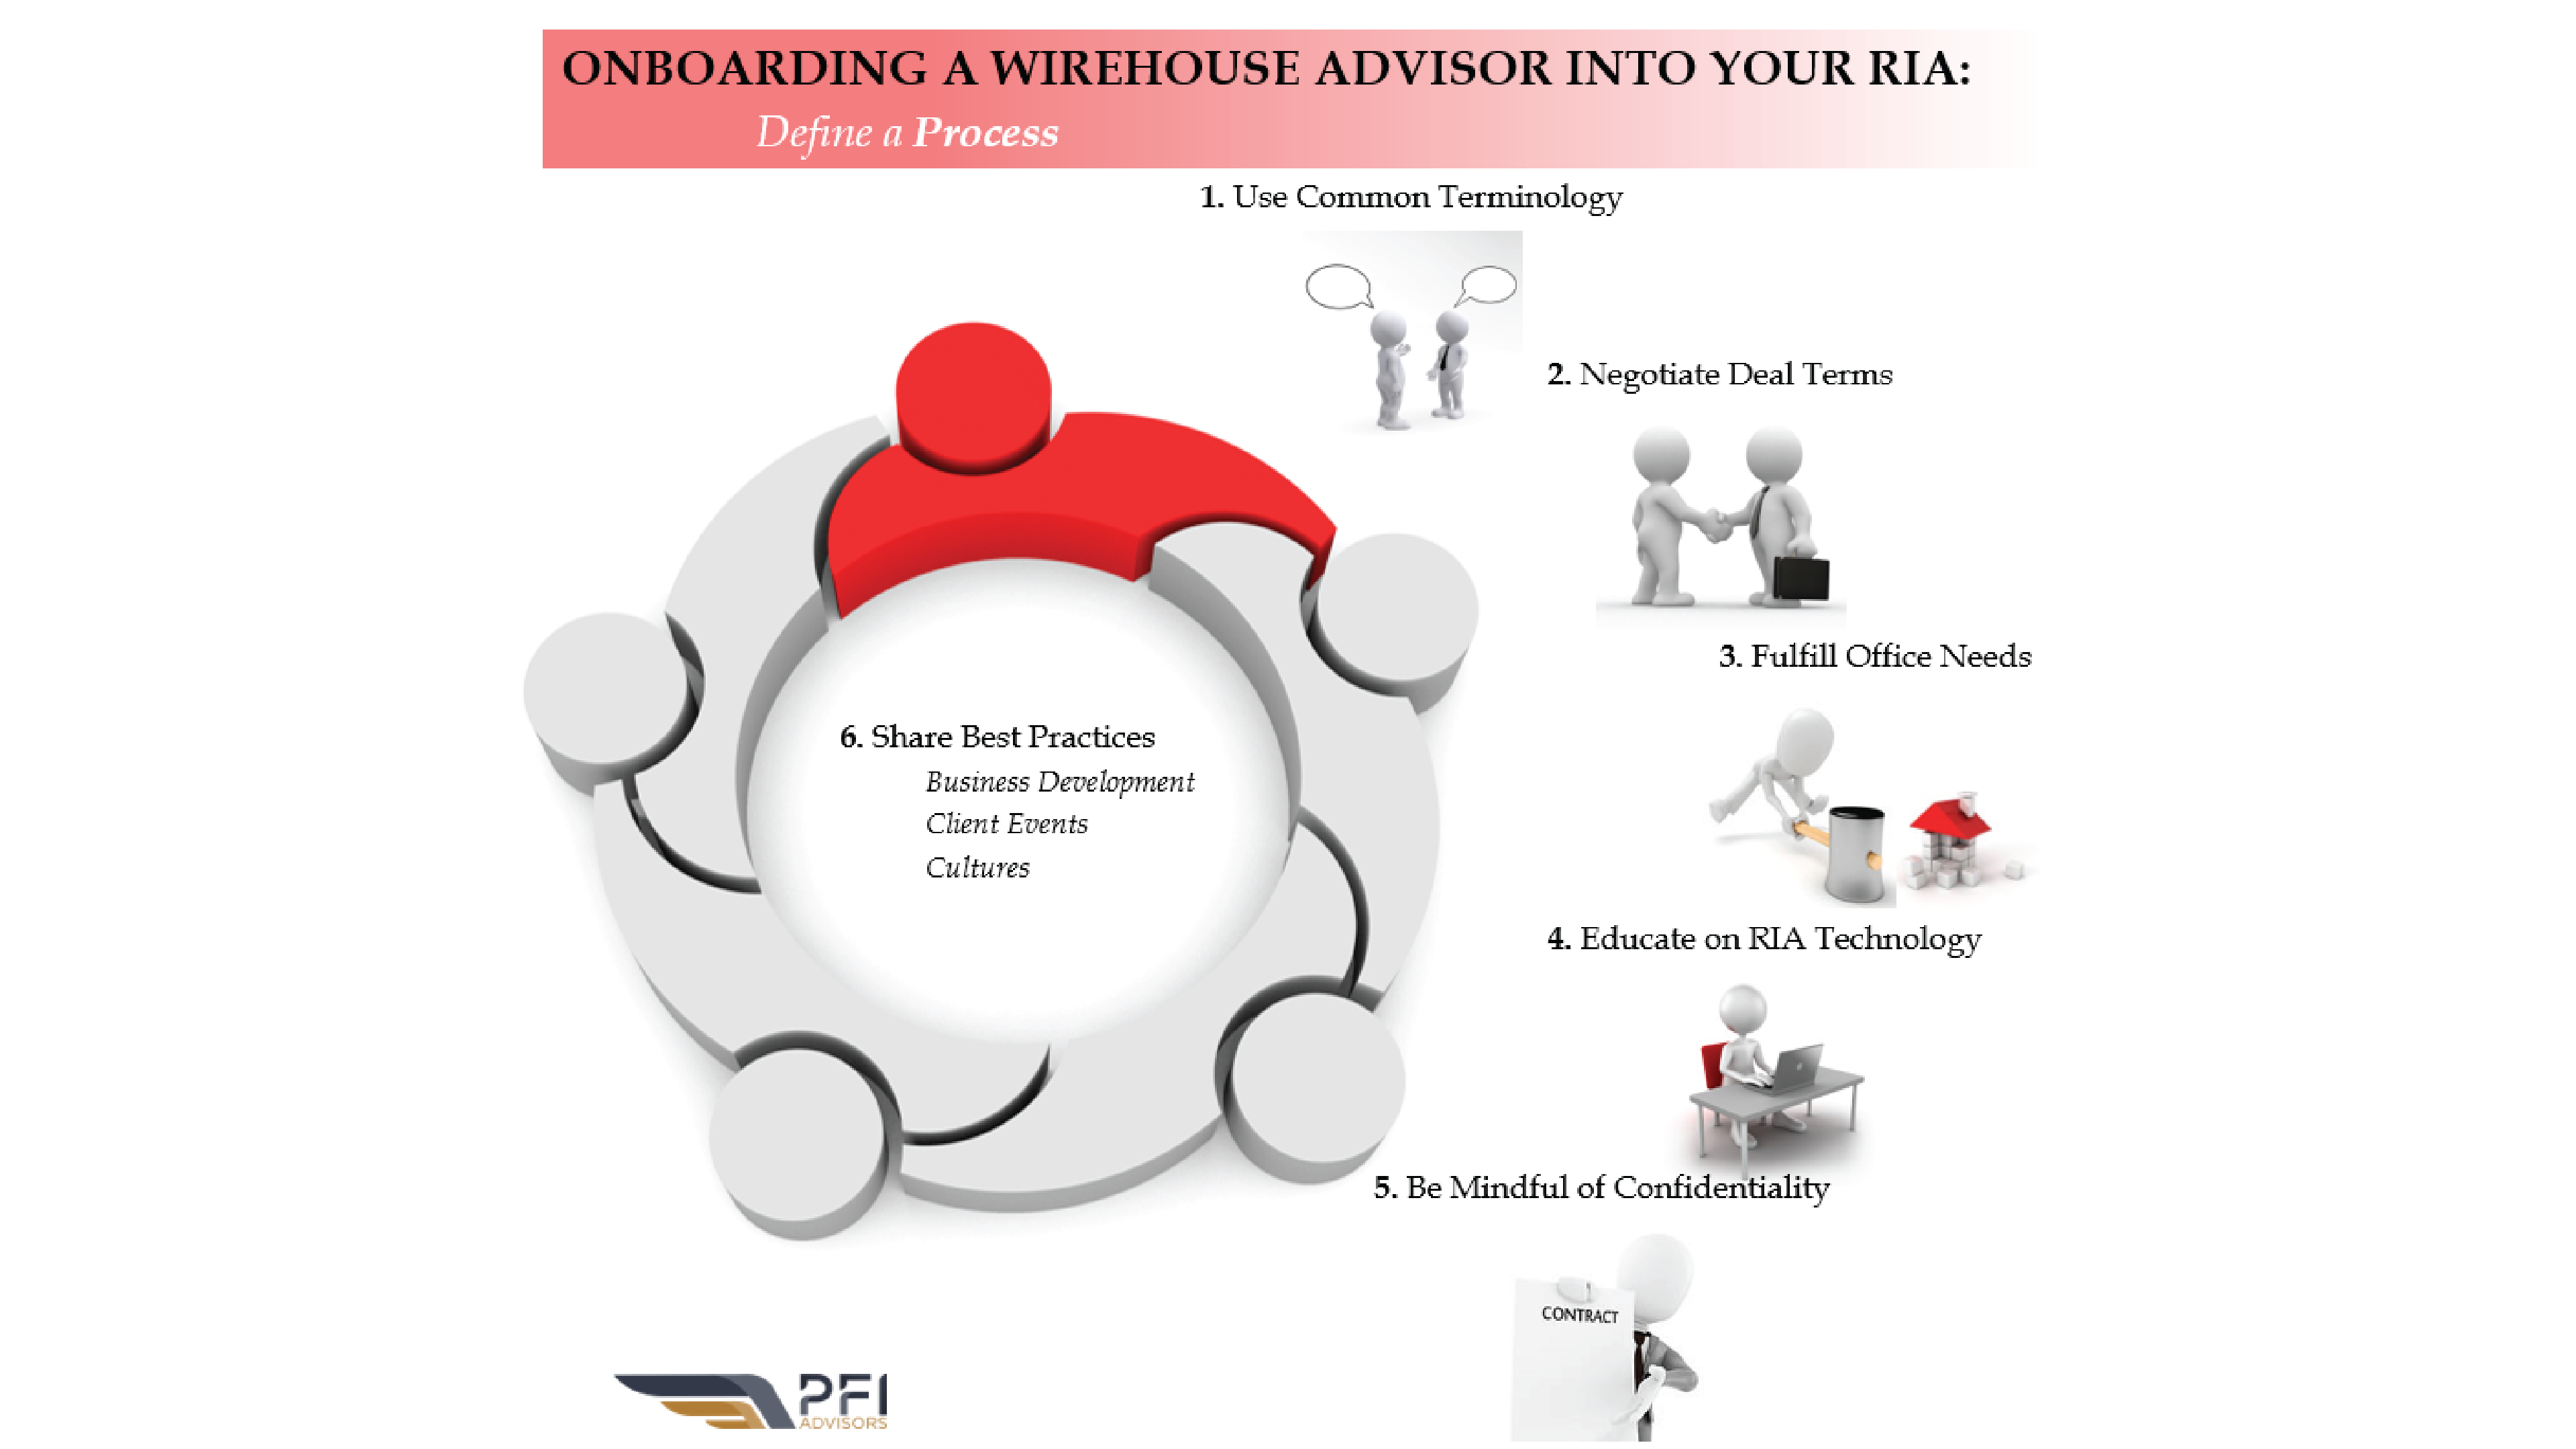 Onboarding a Wirehouse Advisor Into Your RIA